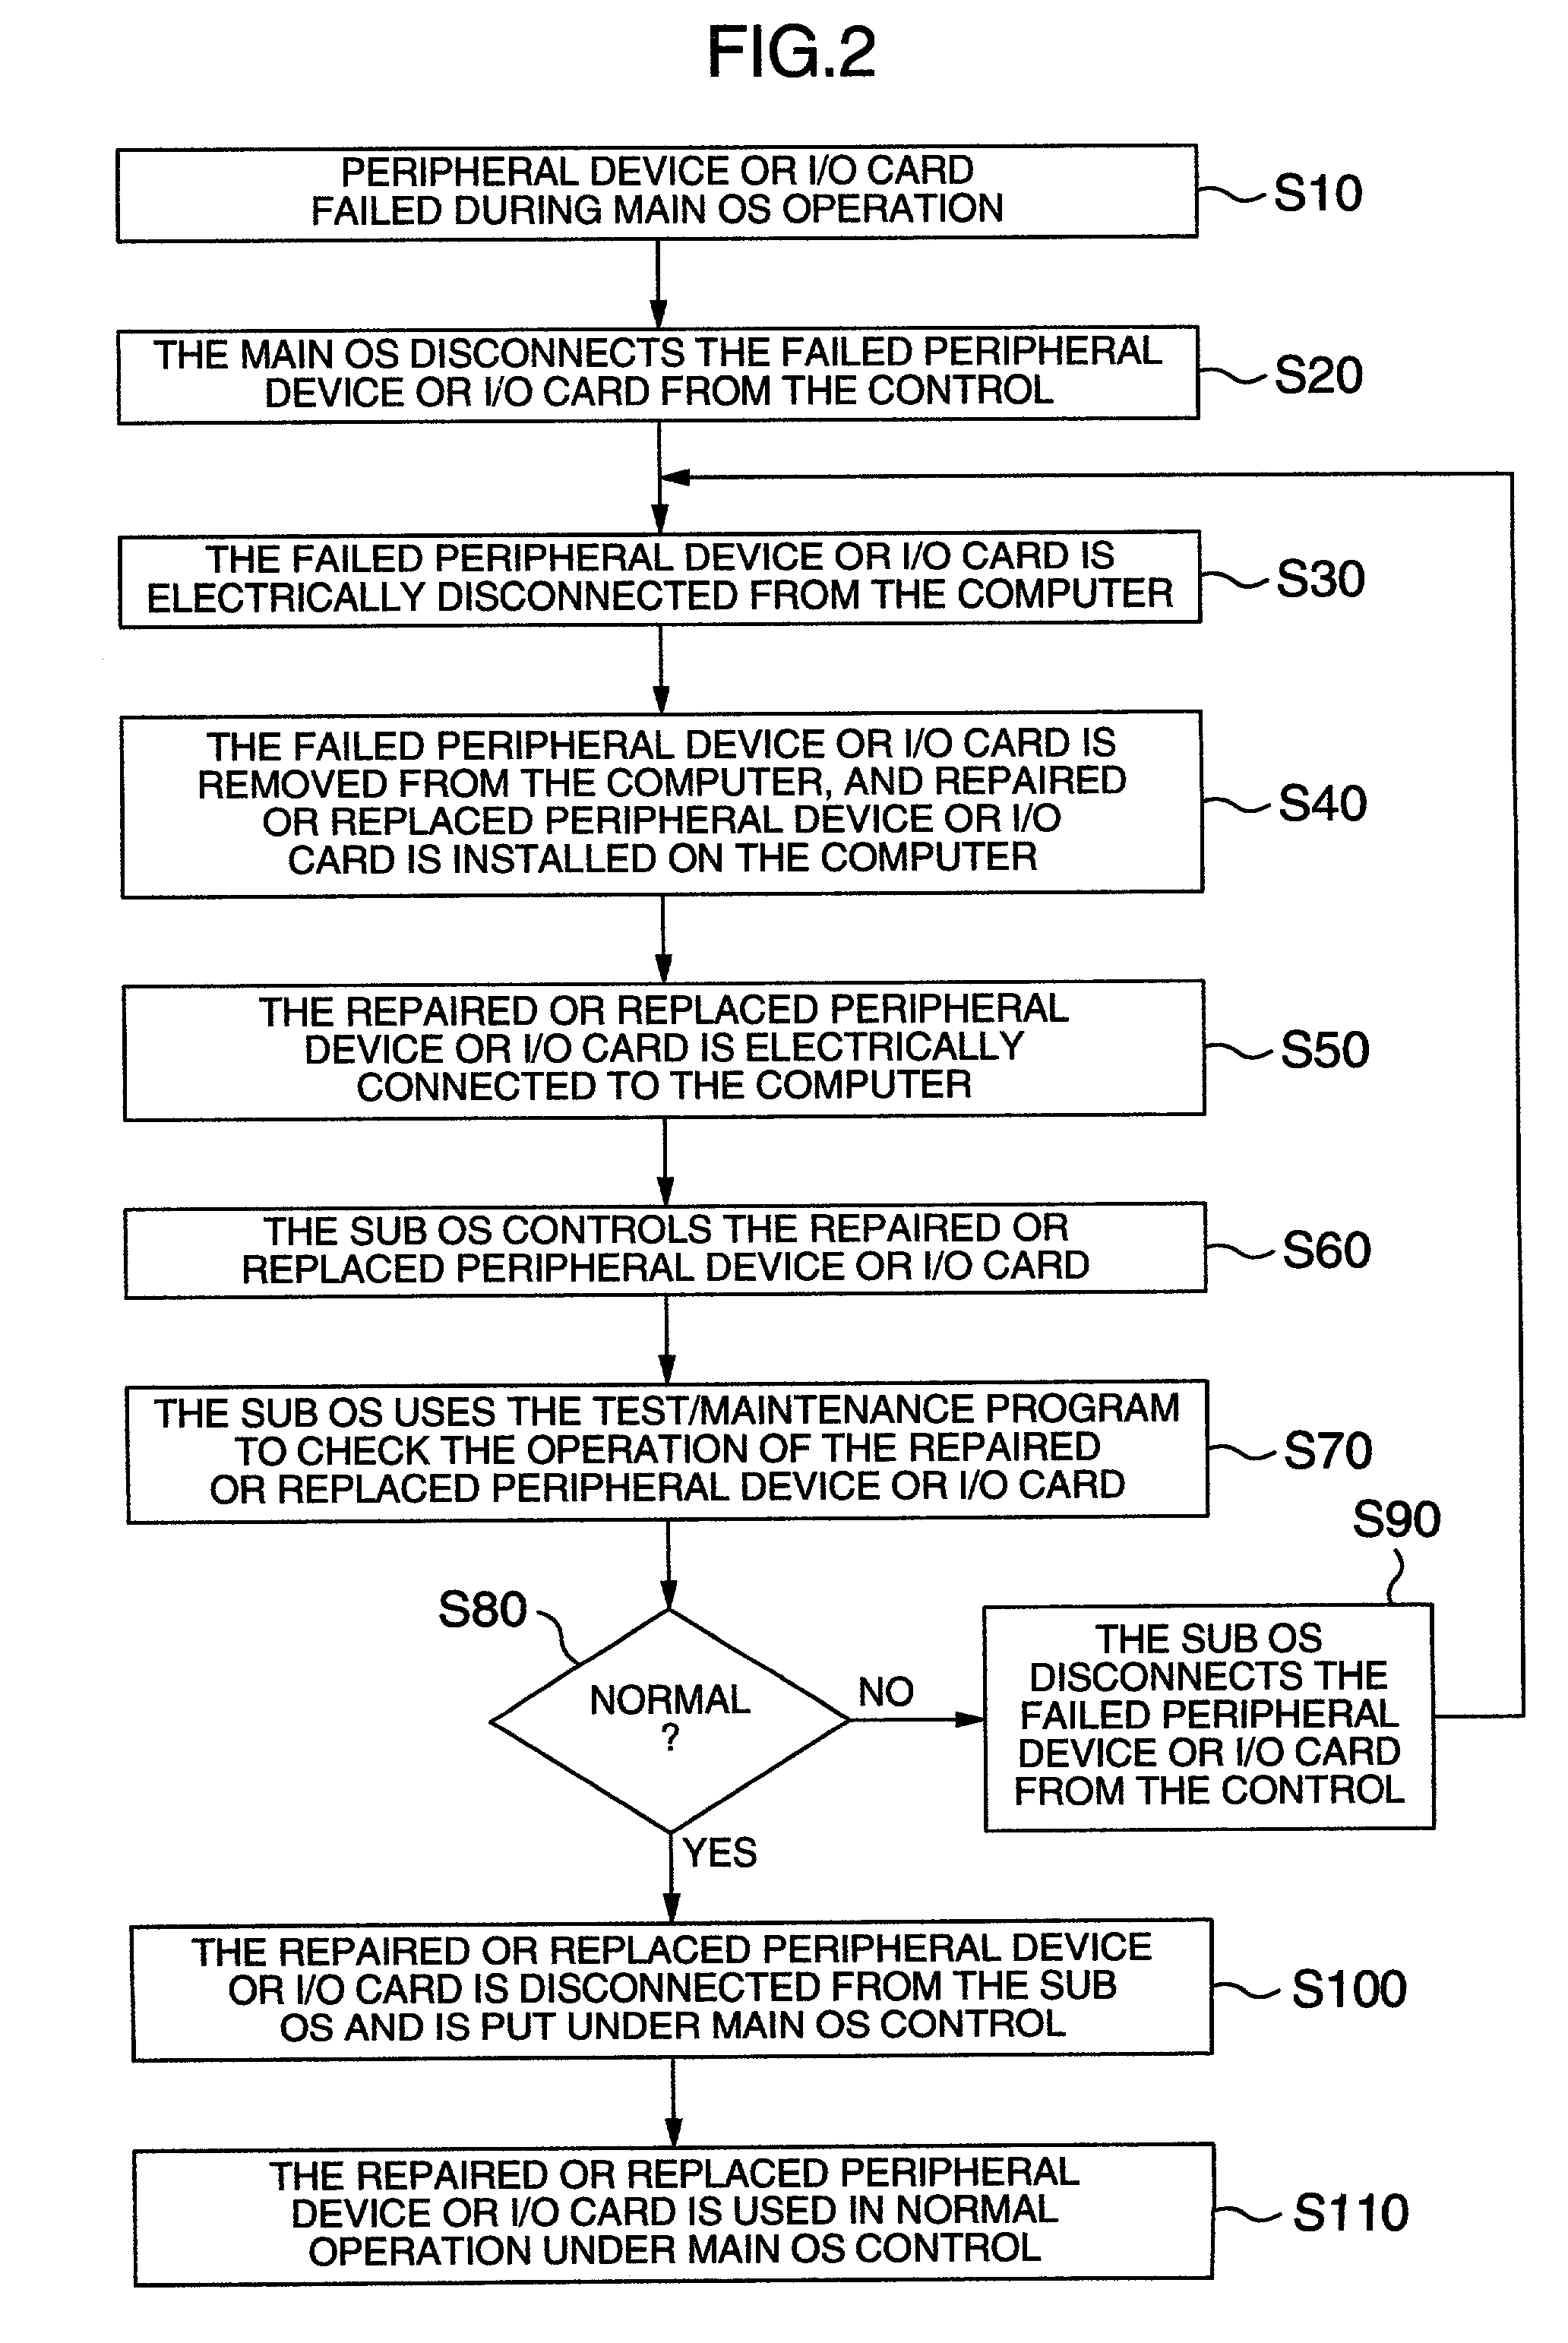 Computer apparatus and method of diagnosing the computer apparatus and replacing, repairing or adding hardware during non-stop operation of the computer apparatus